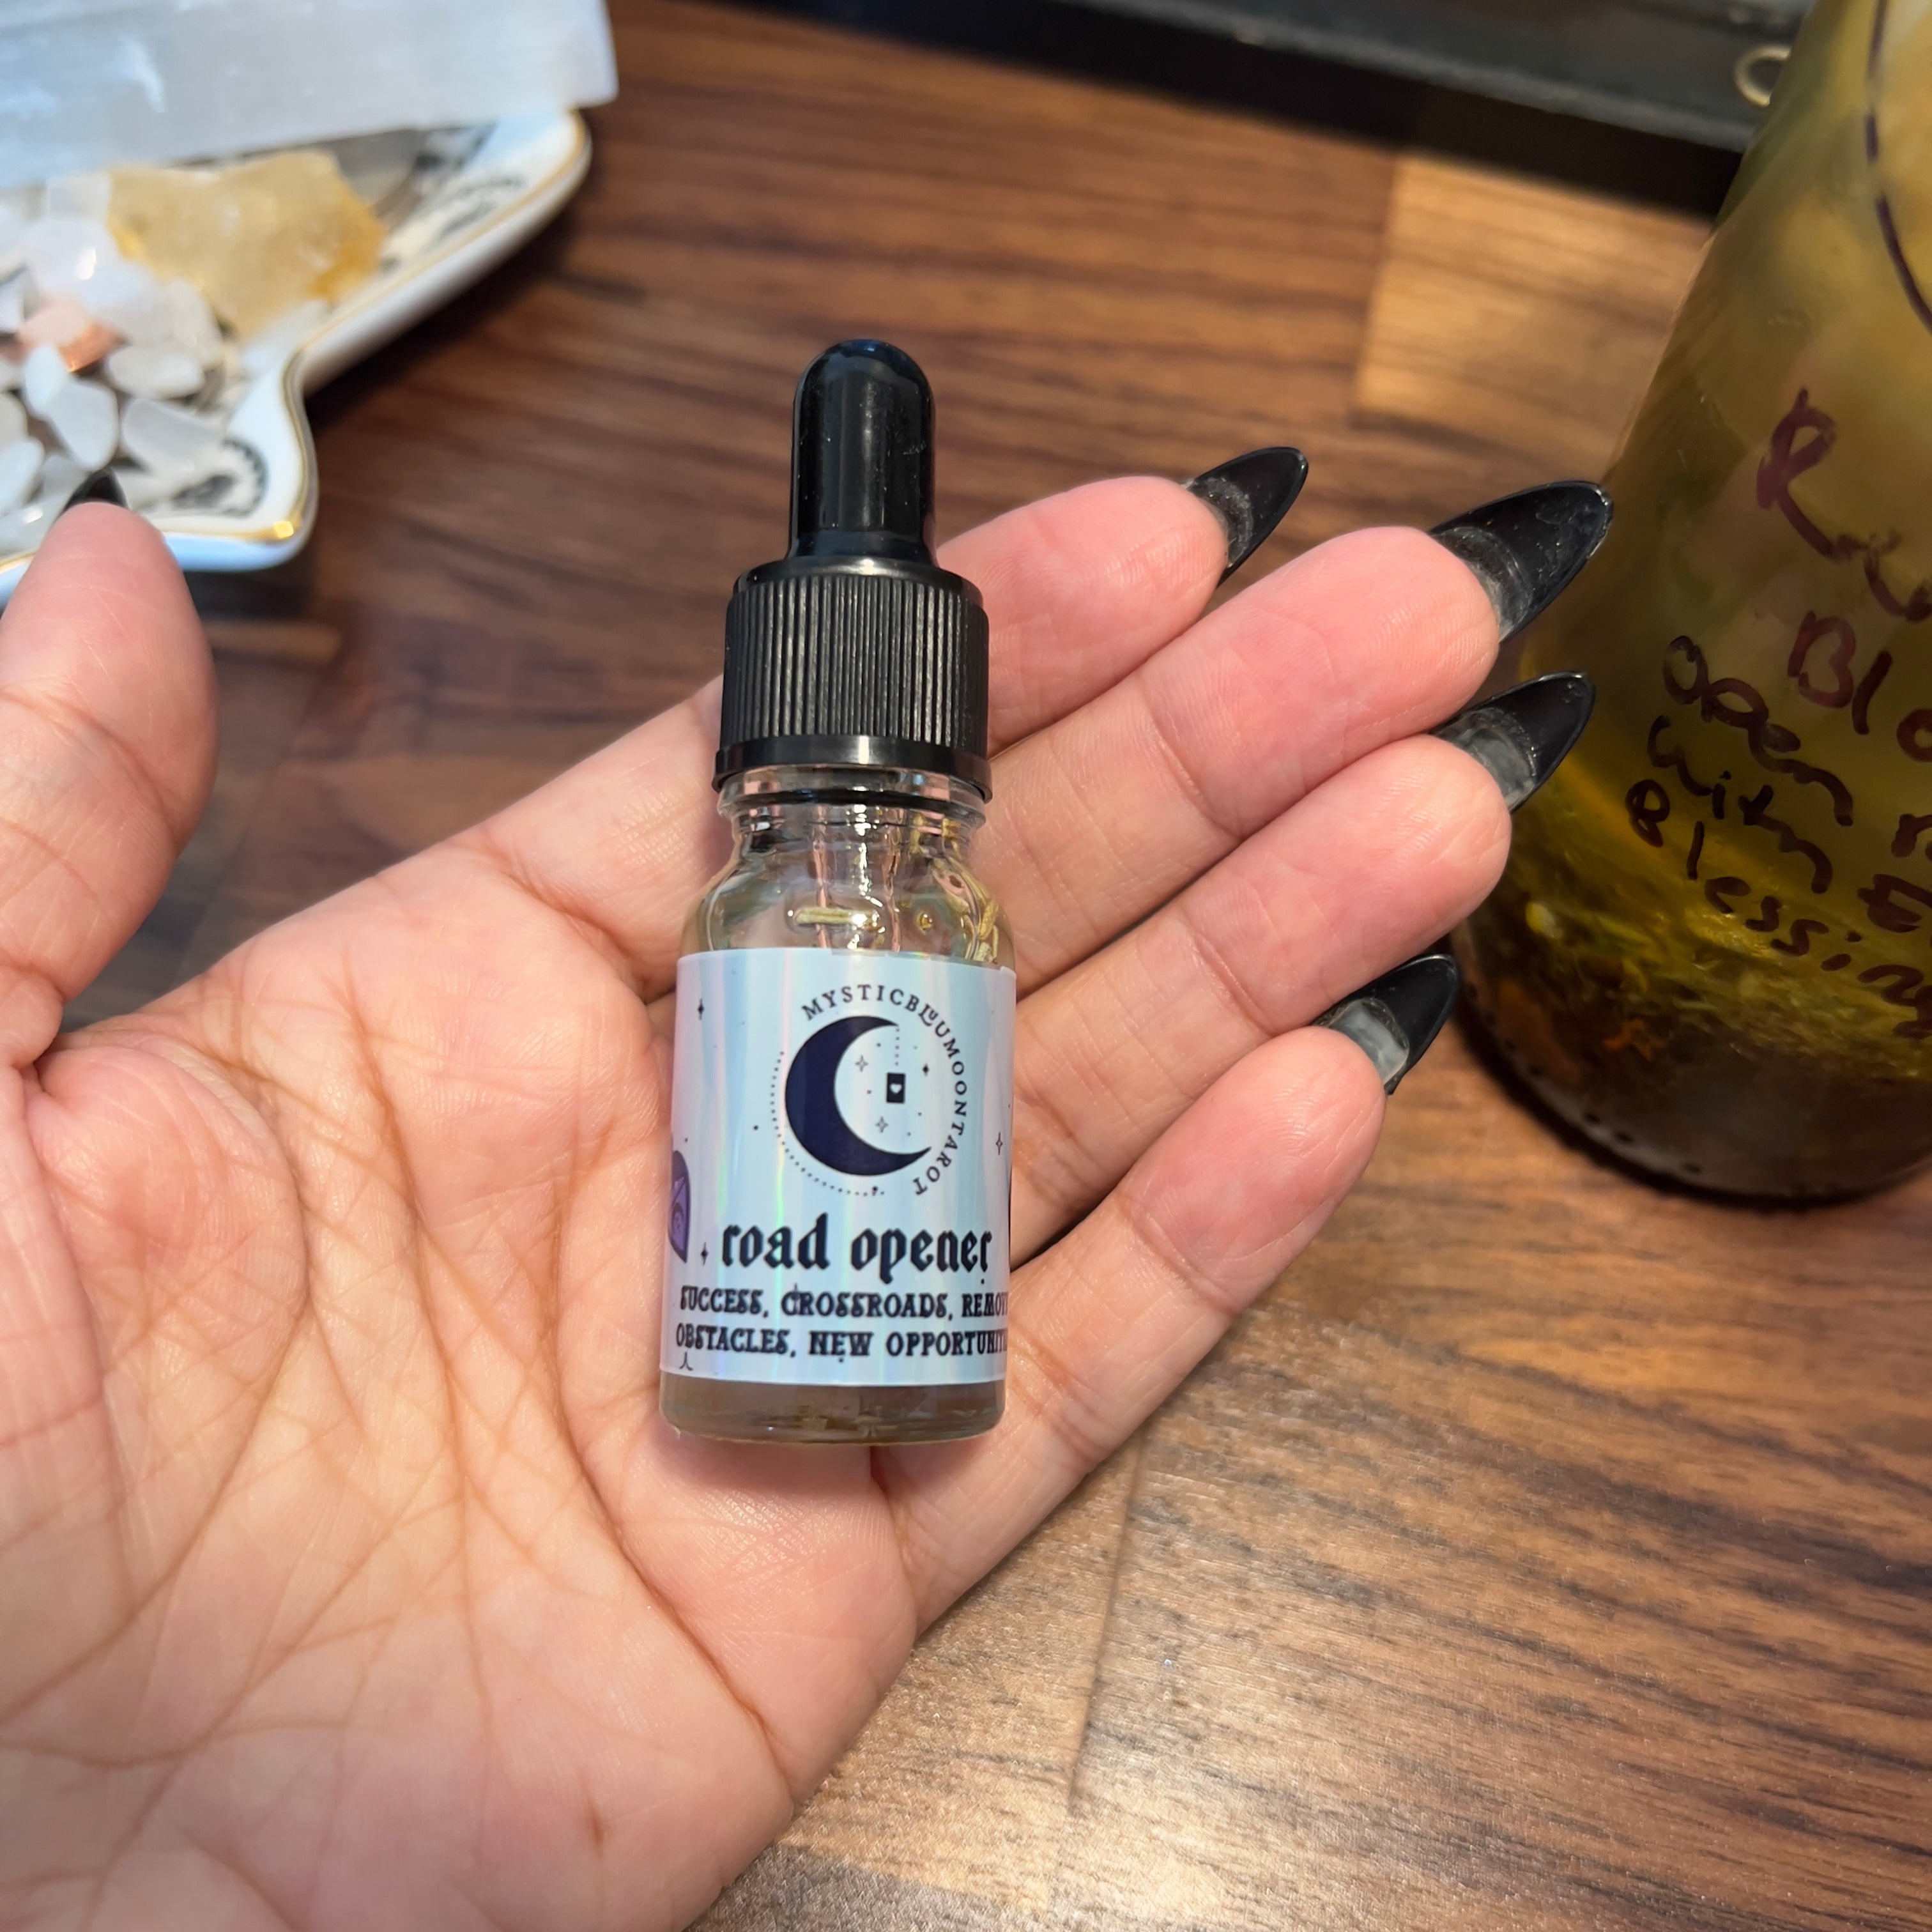 Abre Camino Oil Road Opener Intention Oil - Eleggua Blessing | Witchy Gift | Witchcraft Oil